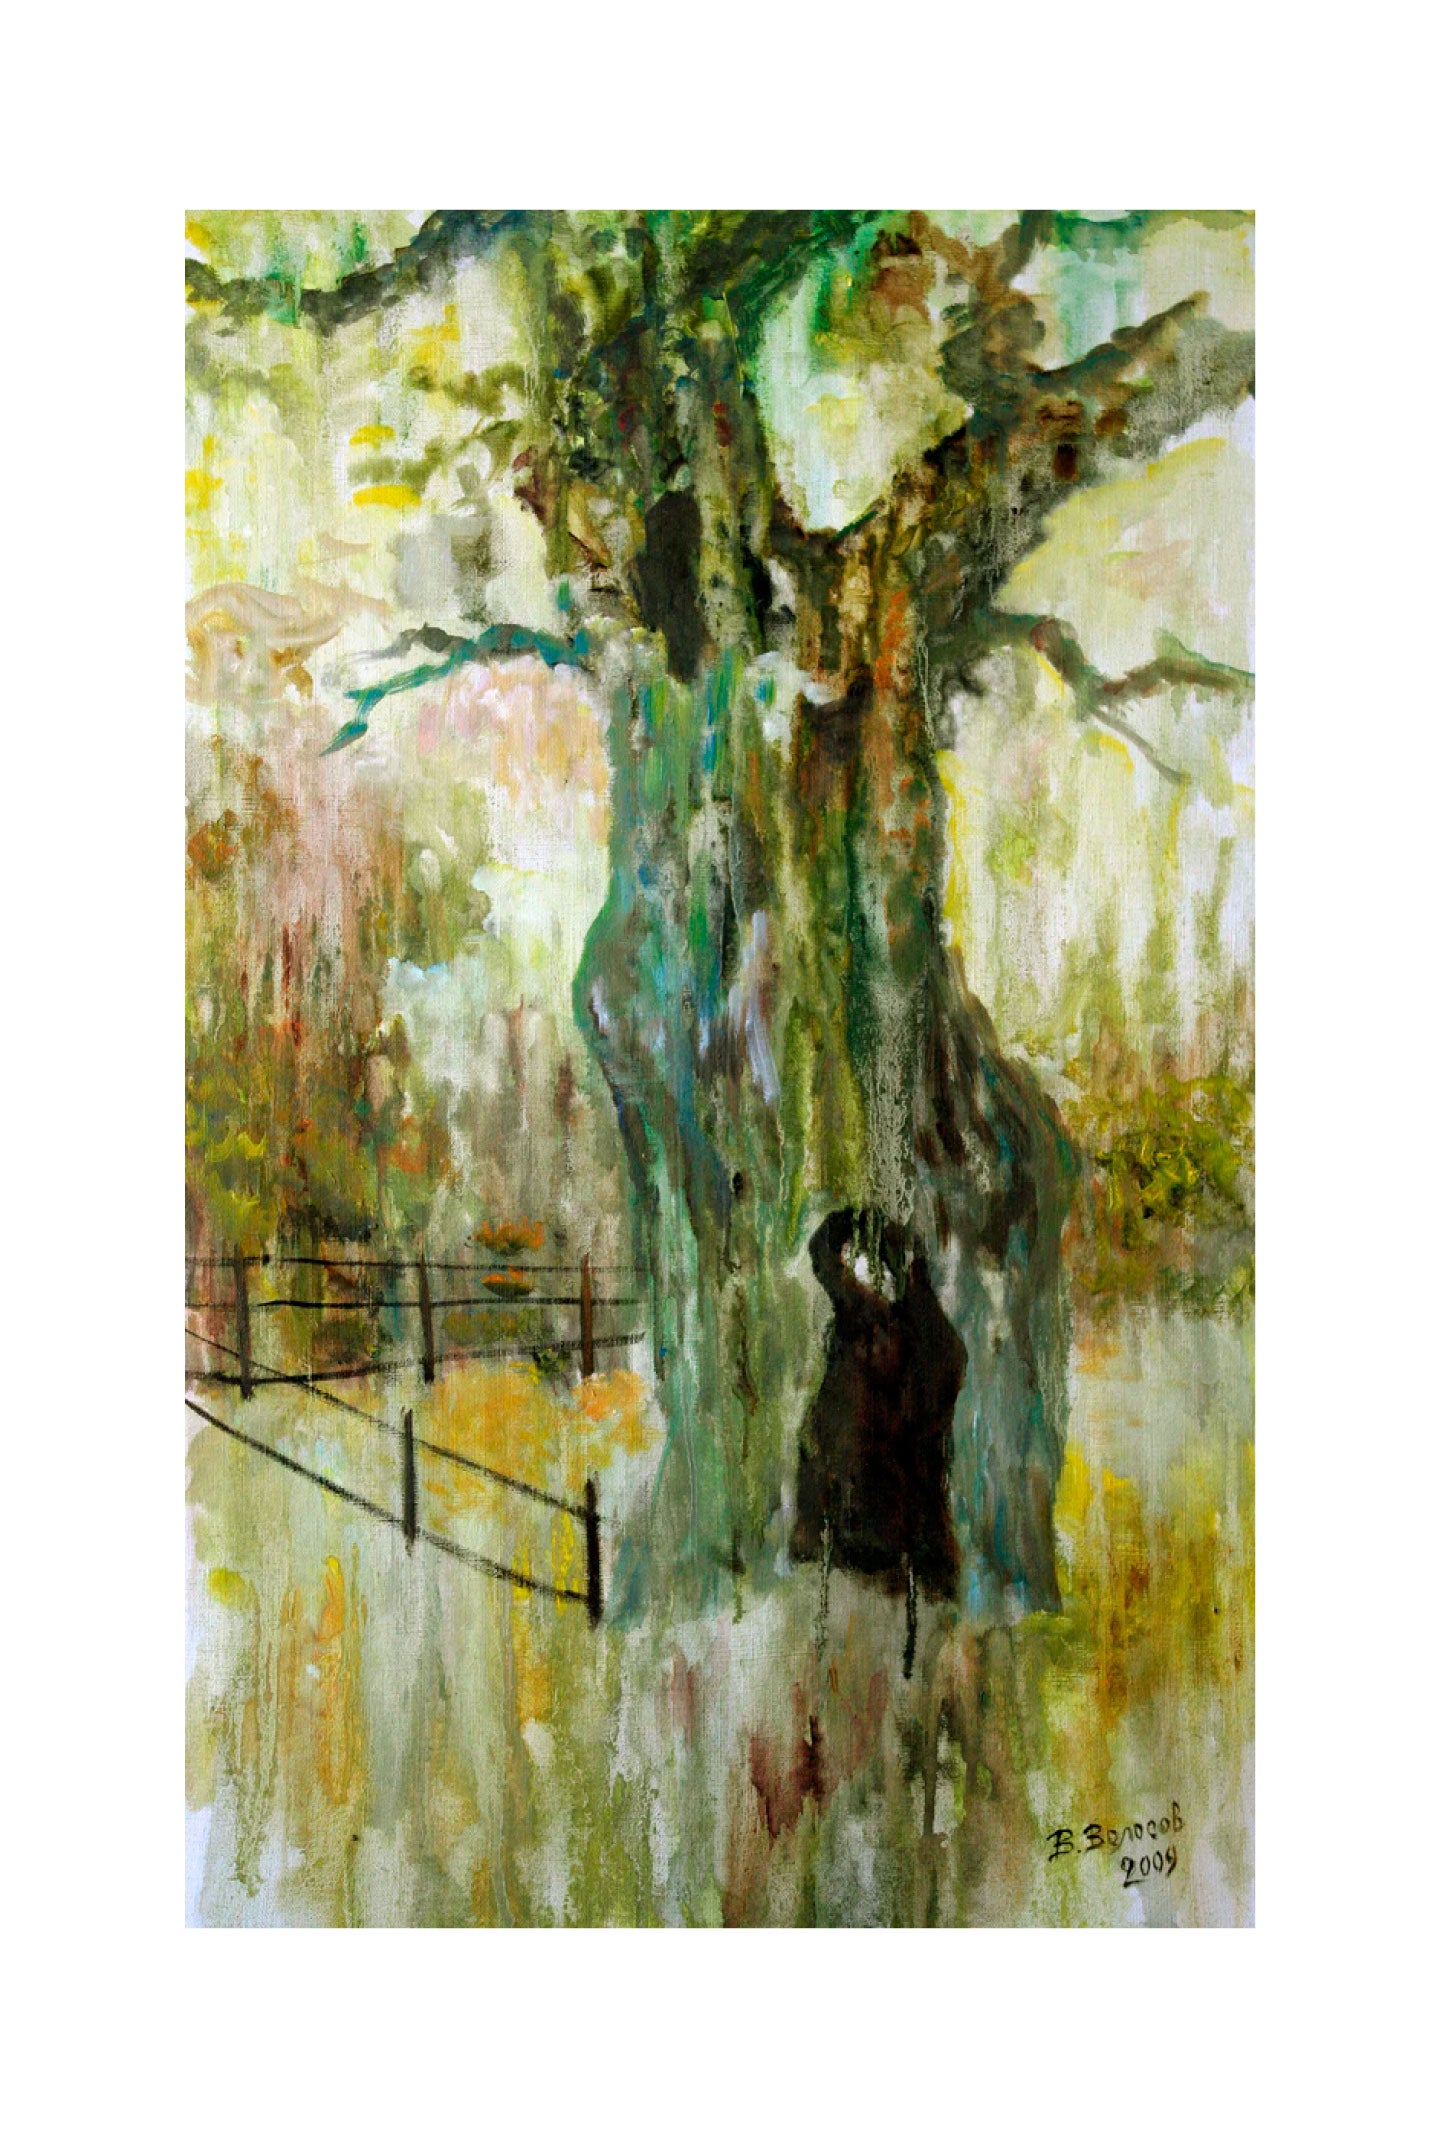 'CRYING OAK' - Oil on Canvas